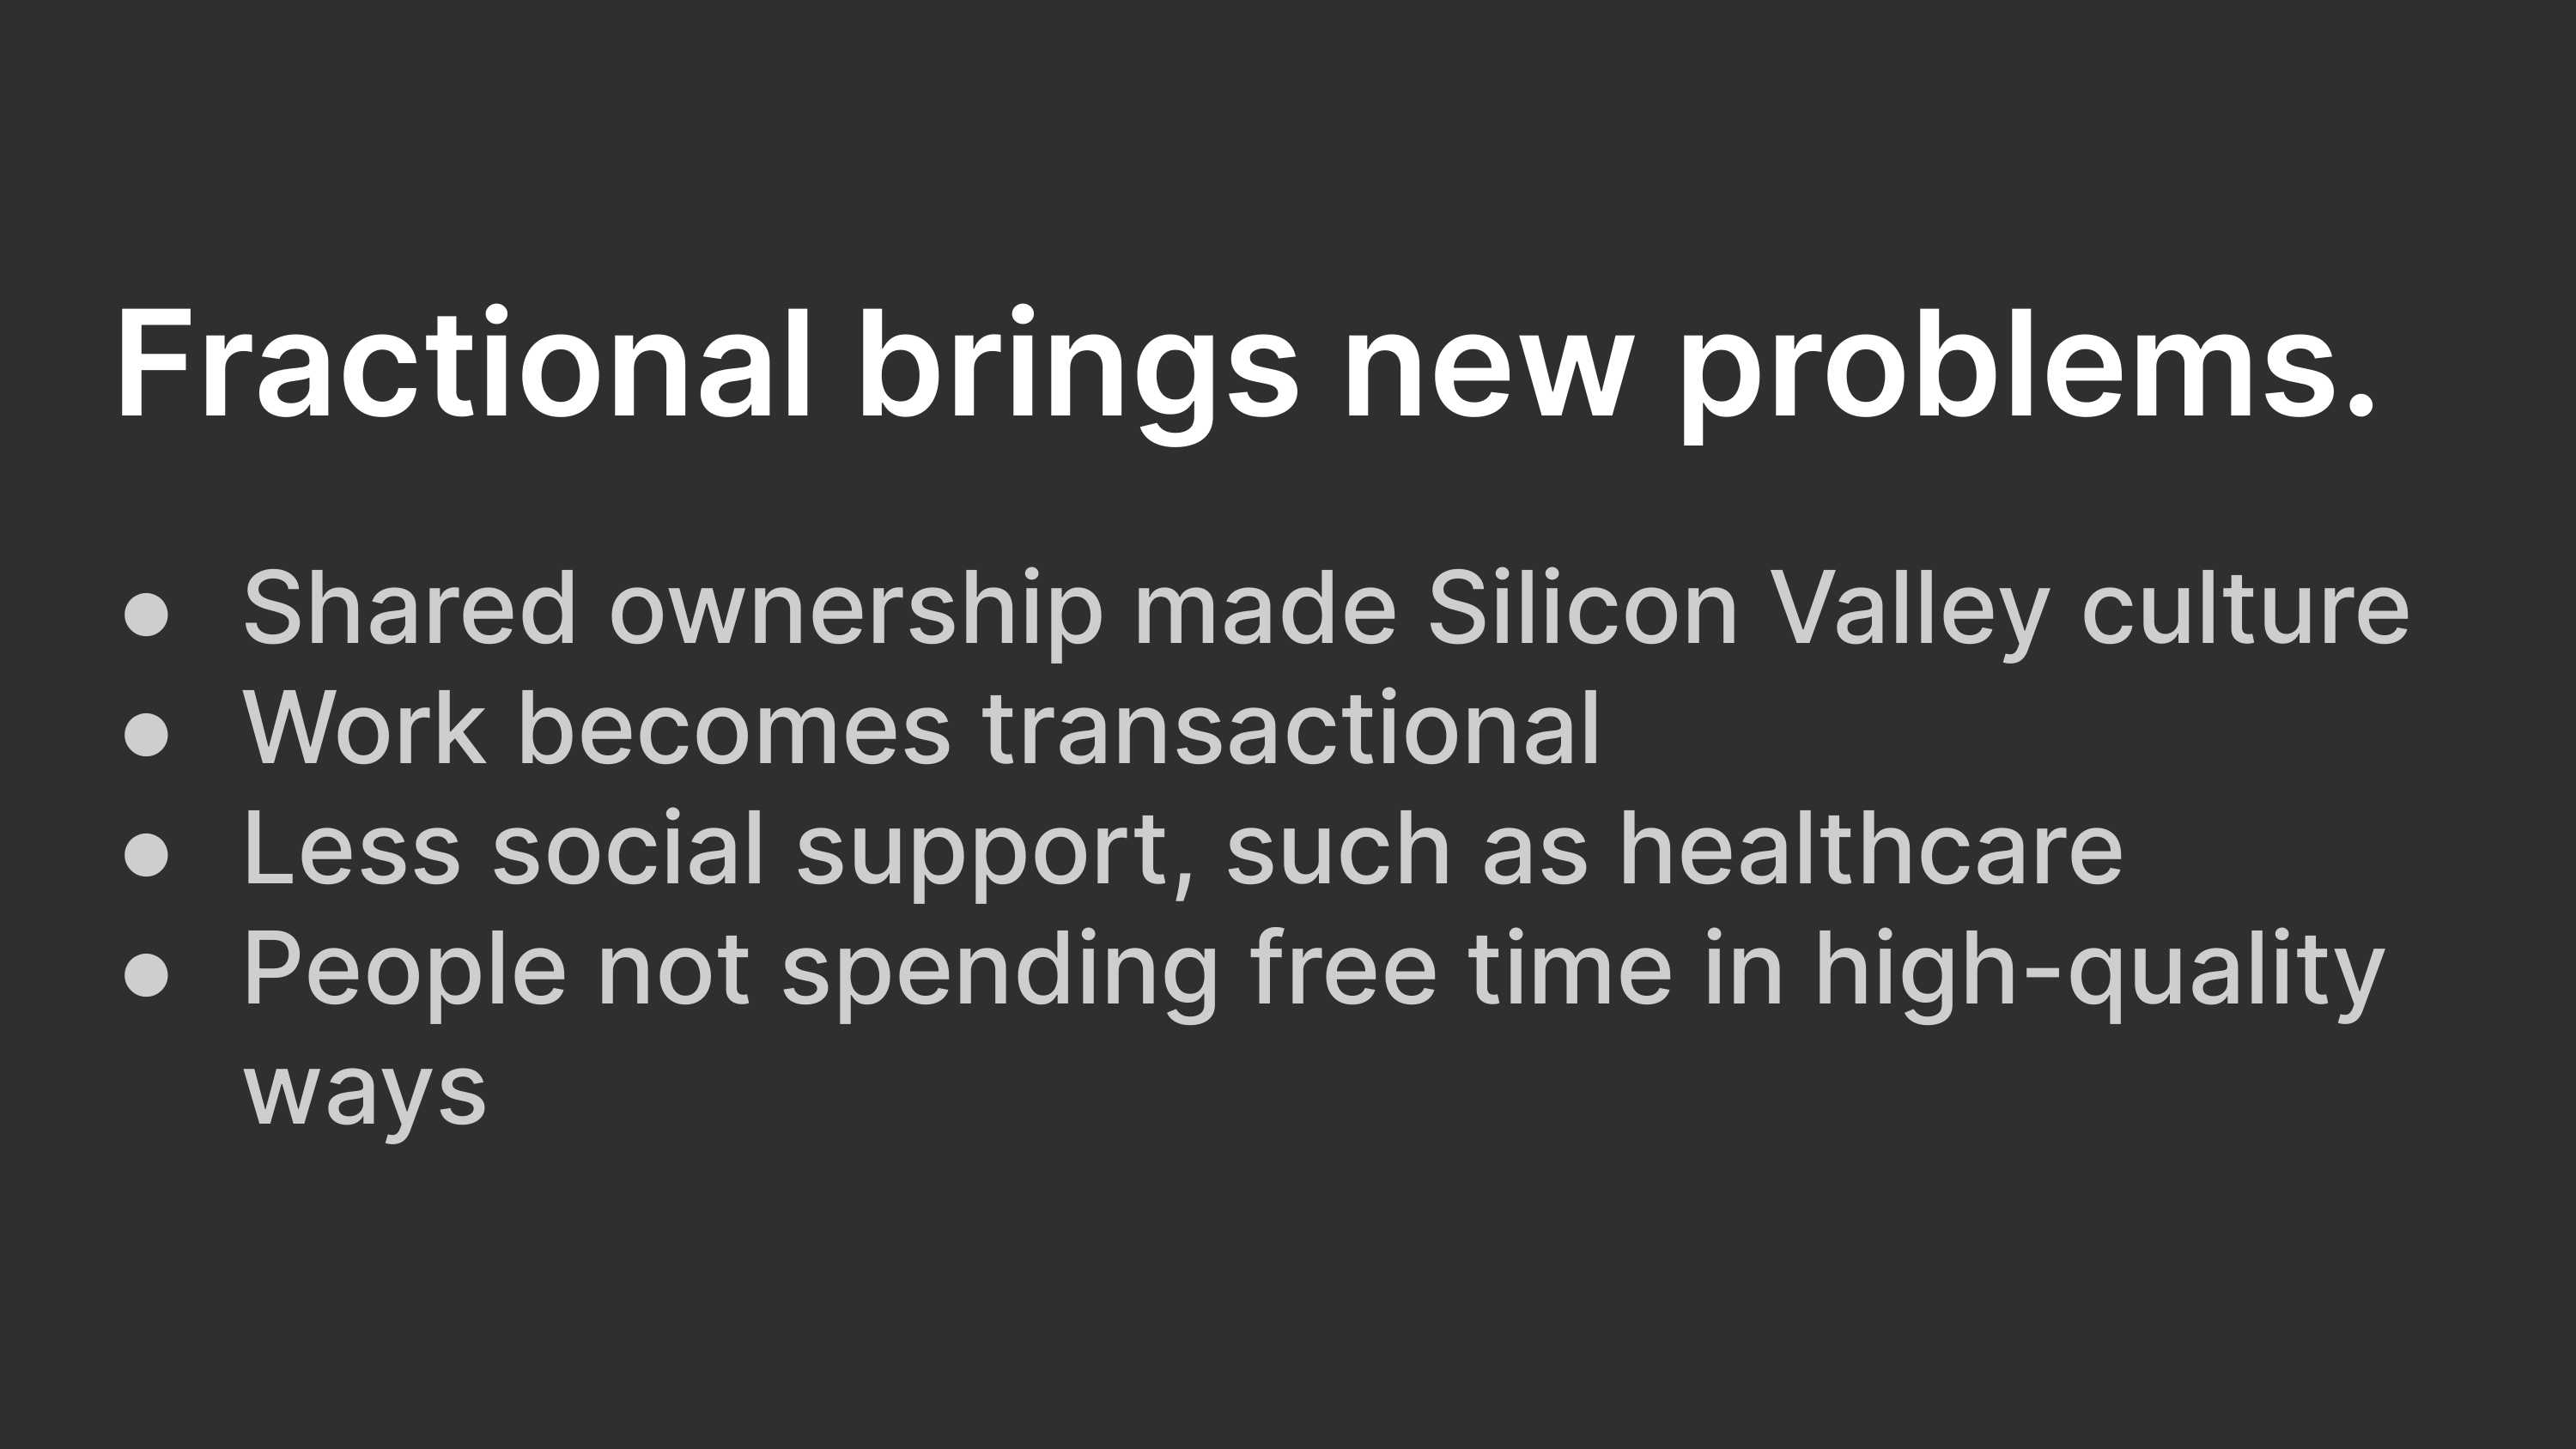 Fractional brings new problmes: Shared ownership made Silicon Valley culture; Work becomes transactional; Less social support, such as healthcare; People not spending free time in high-quality ways.